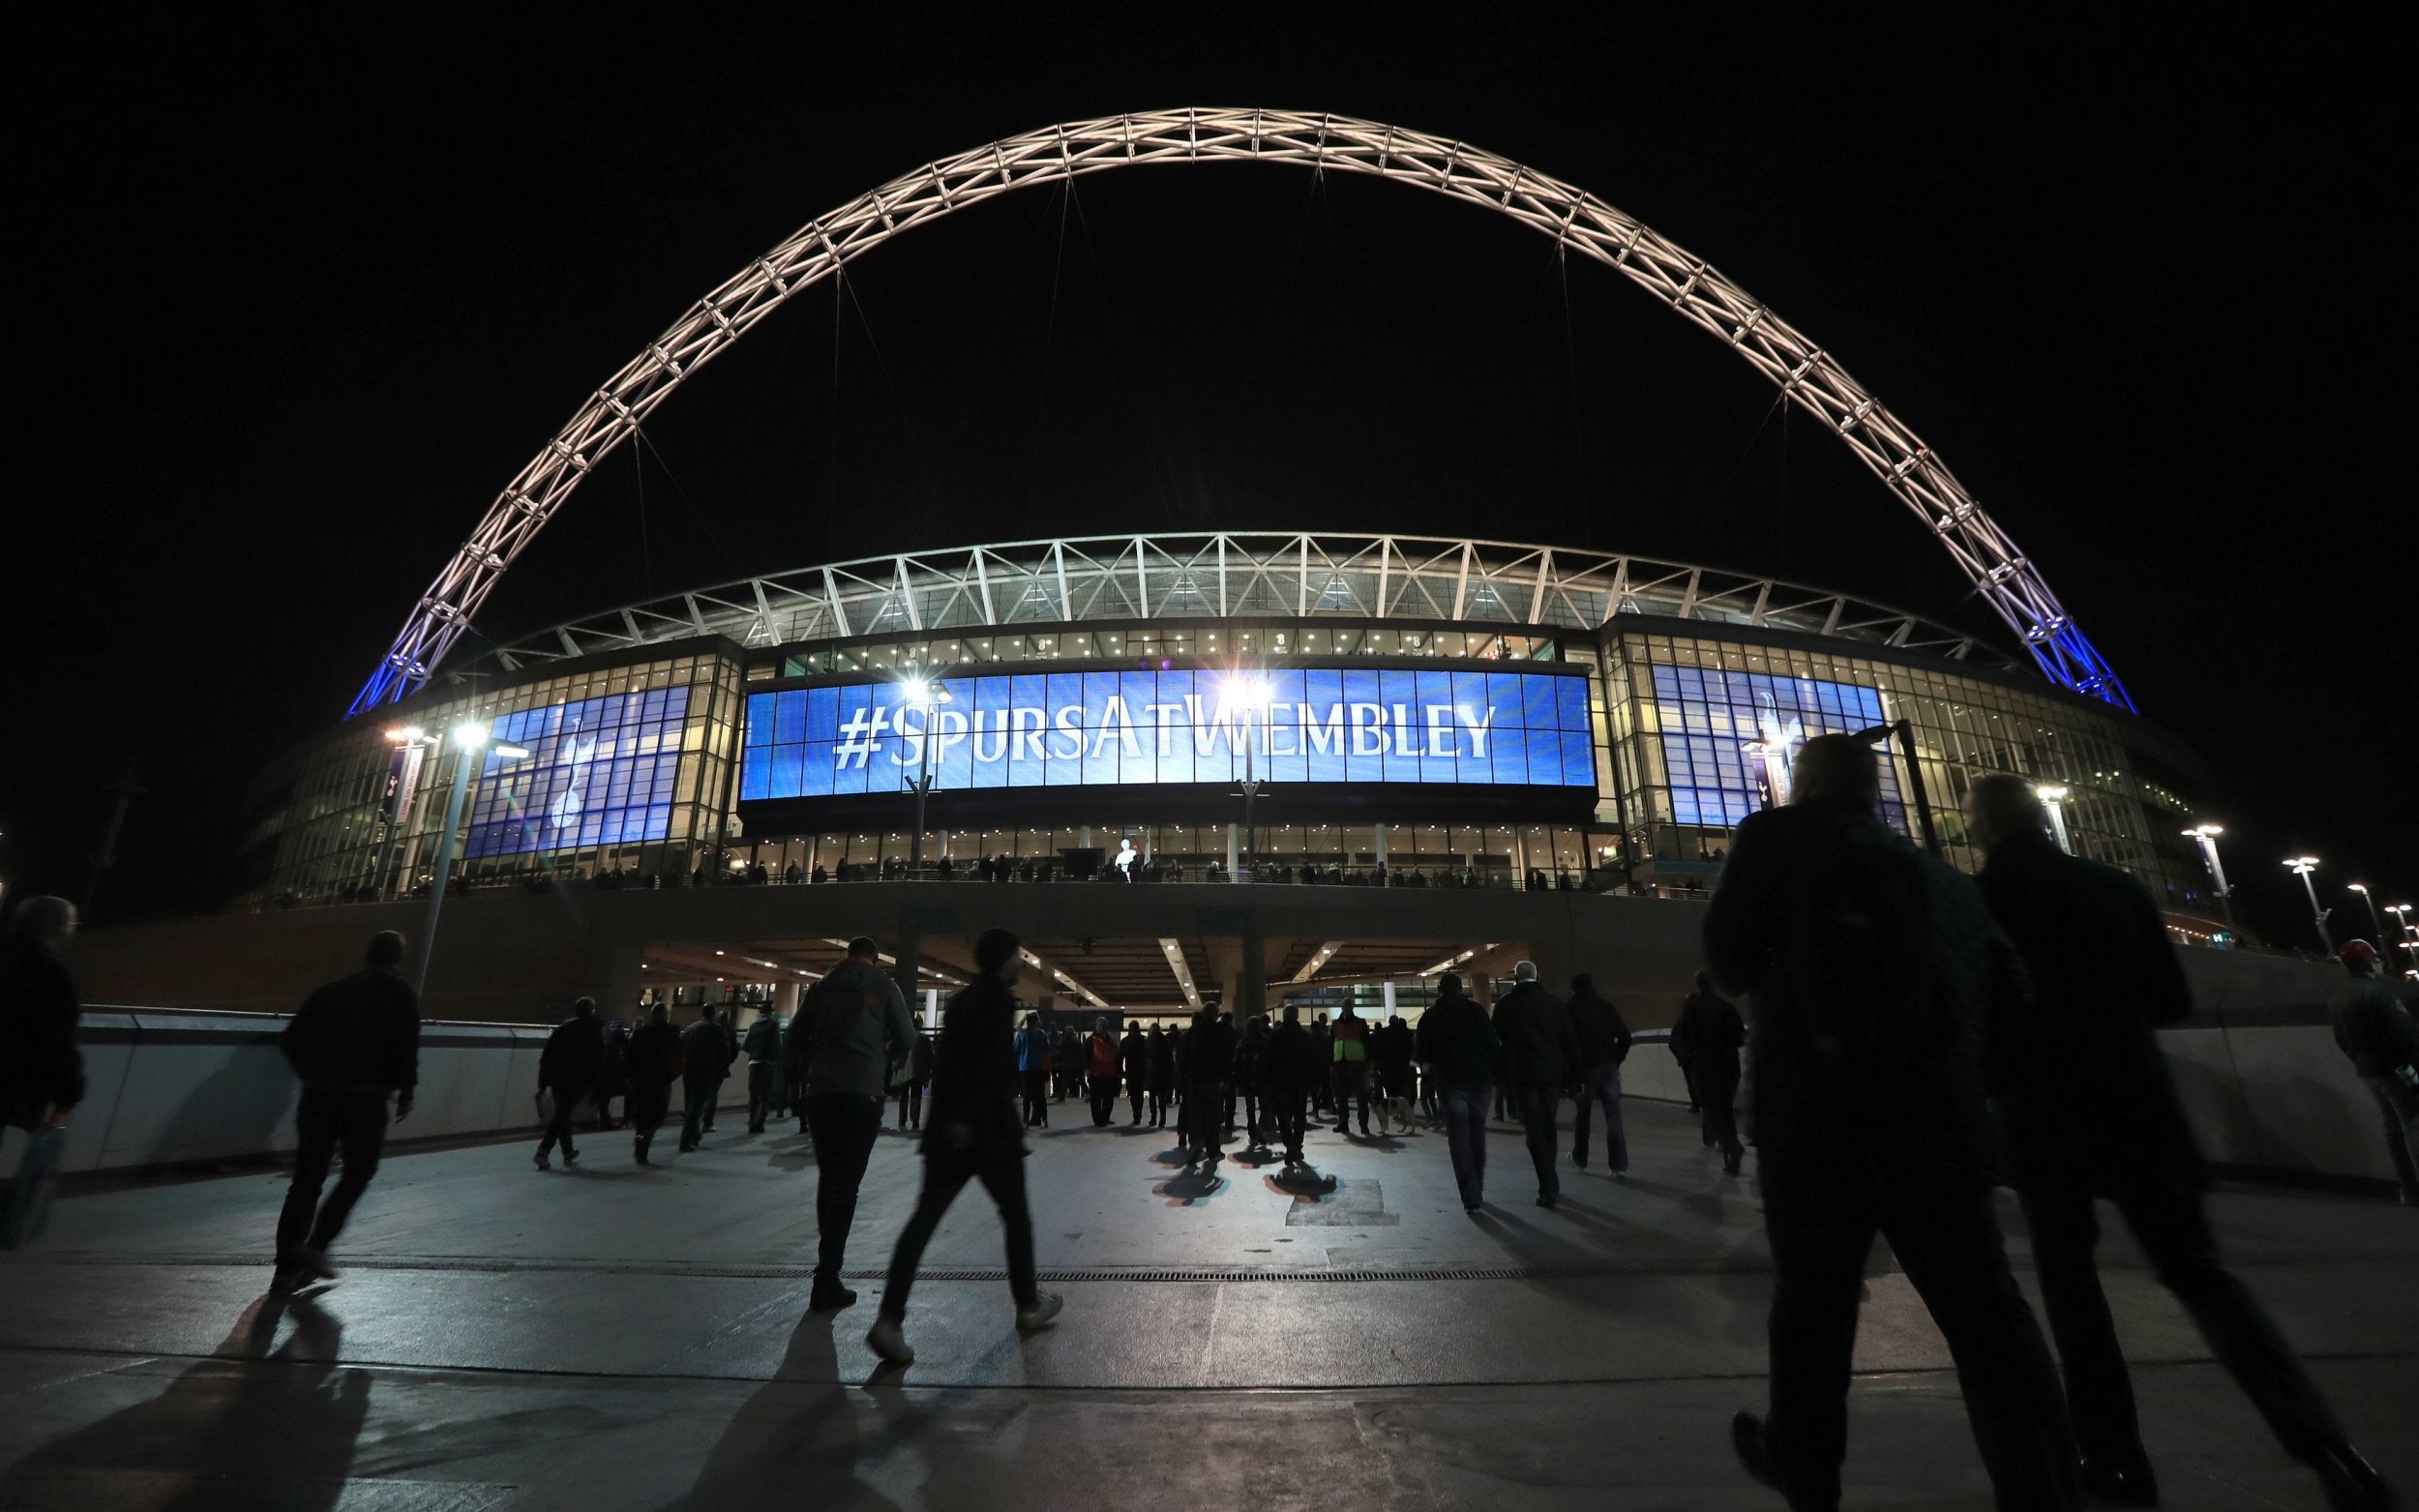 England 2021 would have a final at Wembley